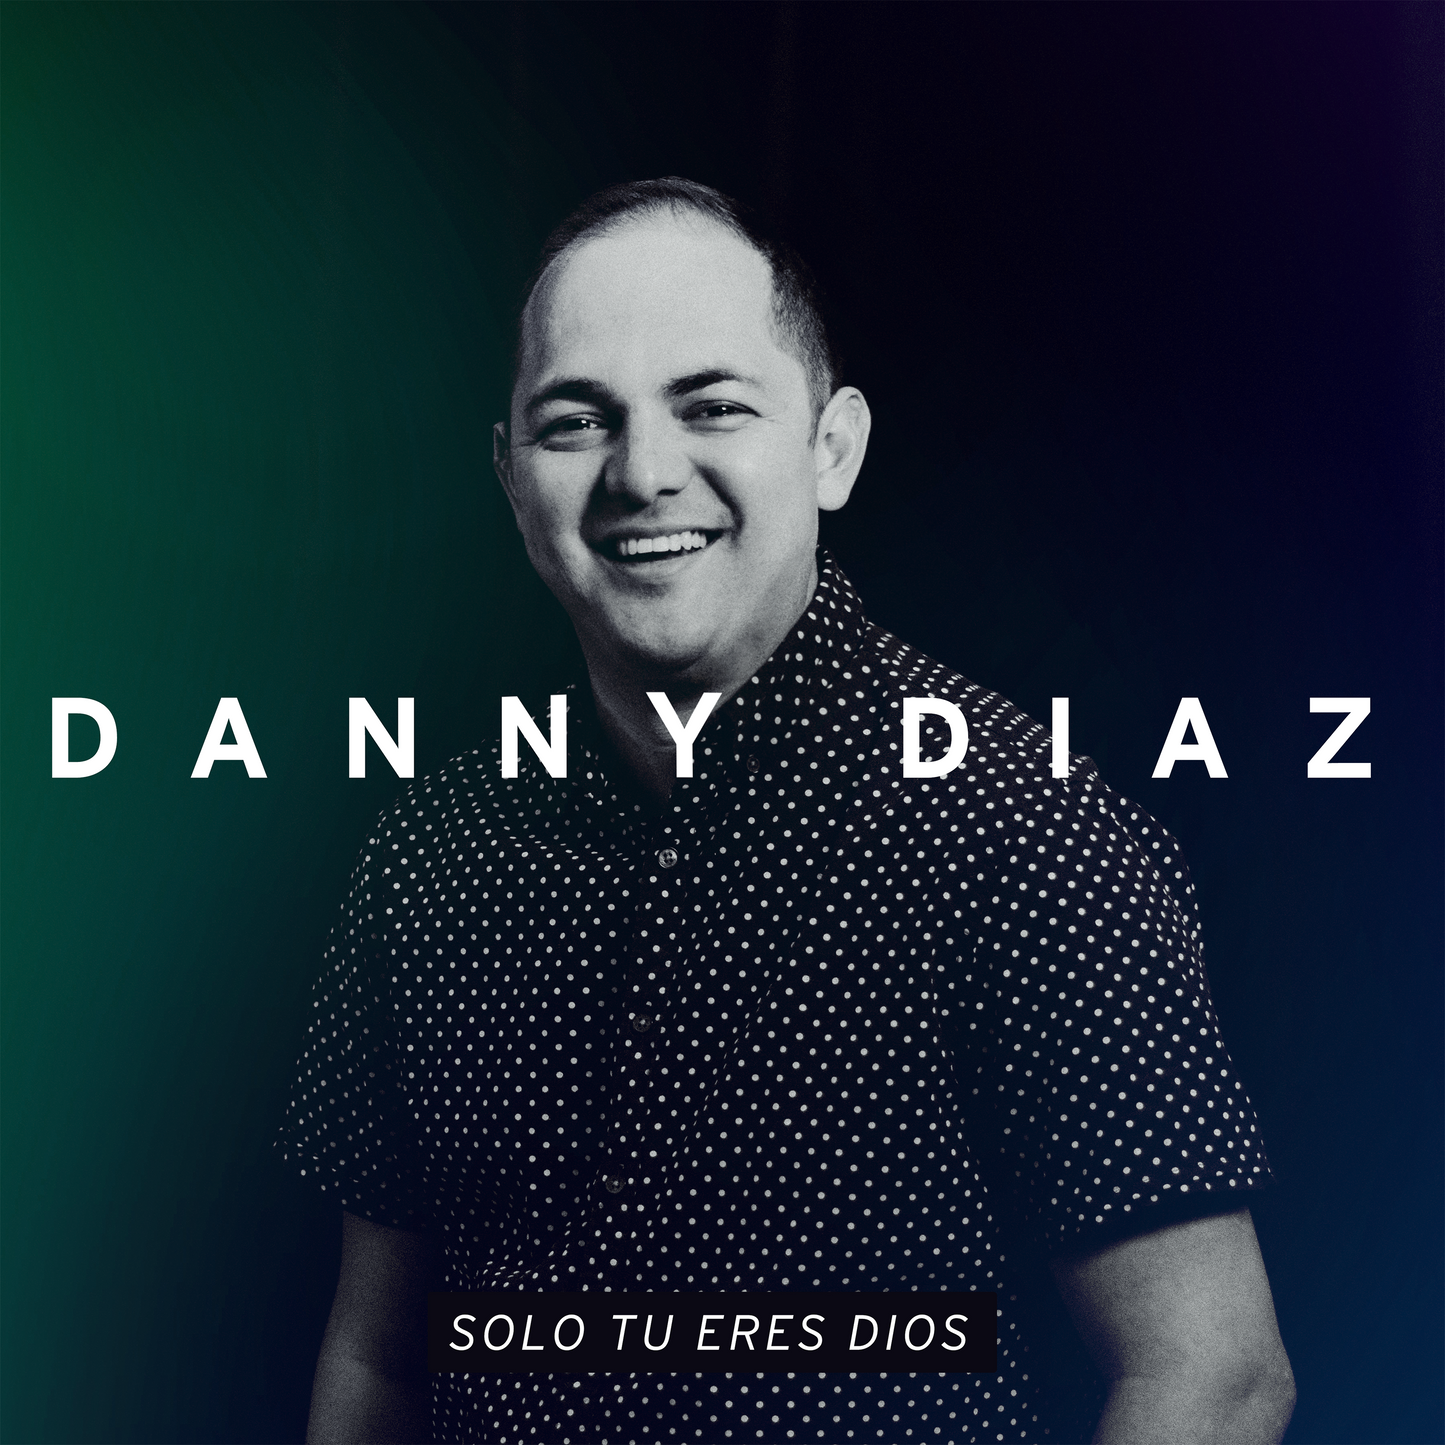 Soon You Will Come (feat. Isaac Moraleja) - Danny Diaz 